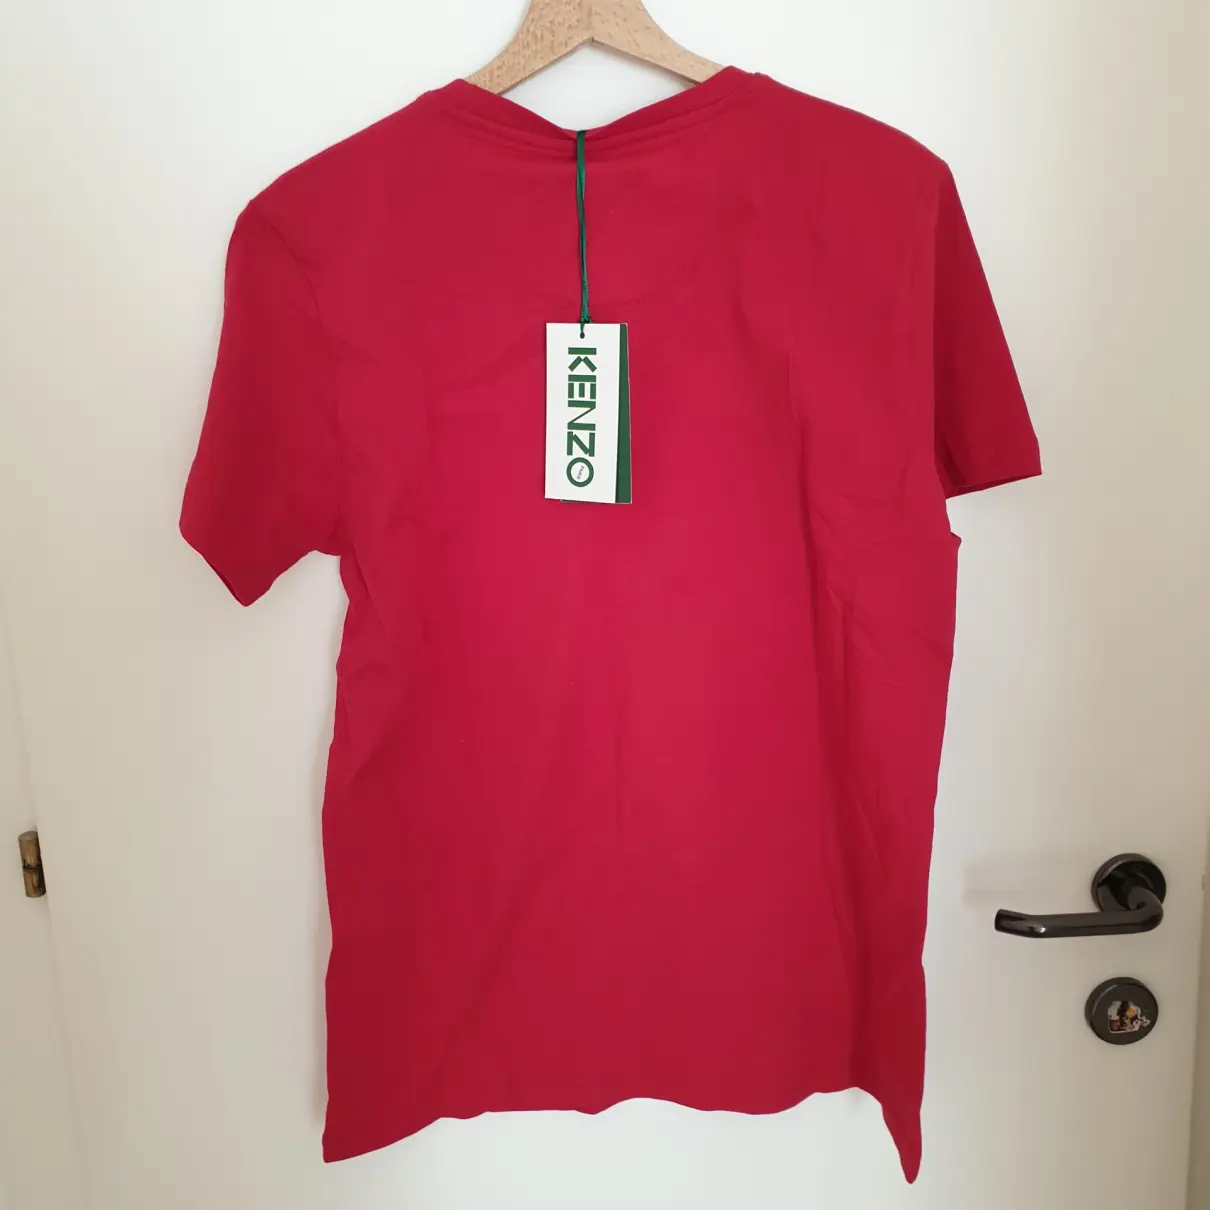 Buy Kenzo Red Cotton T-shirt online